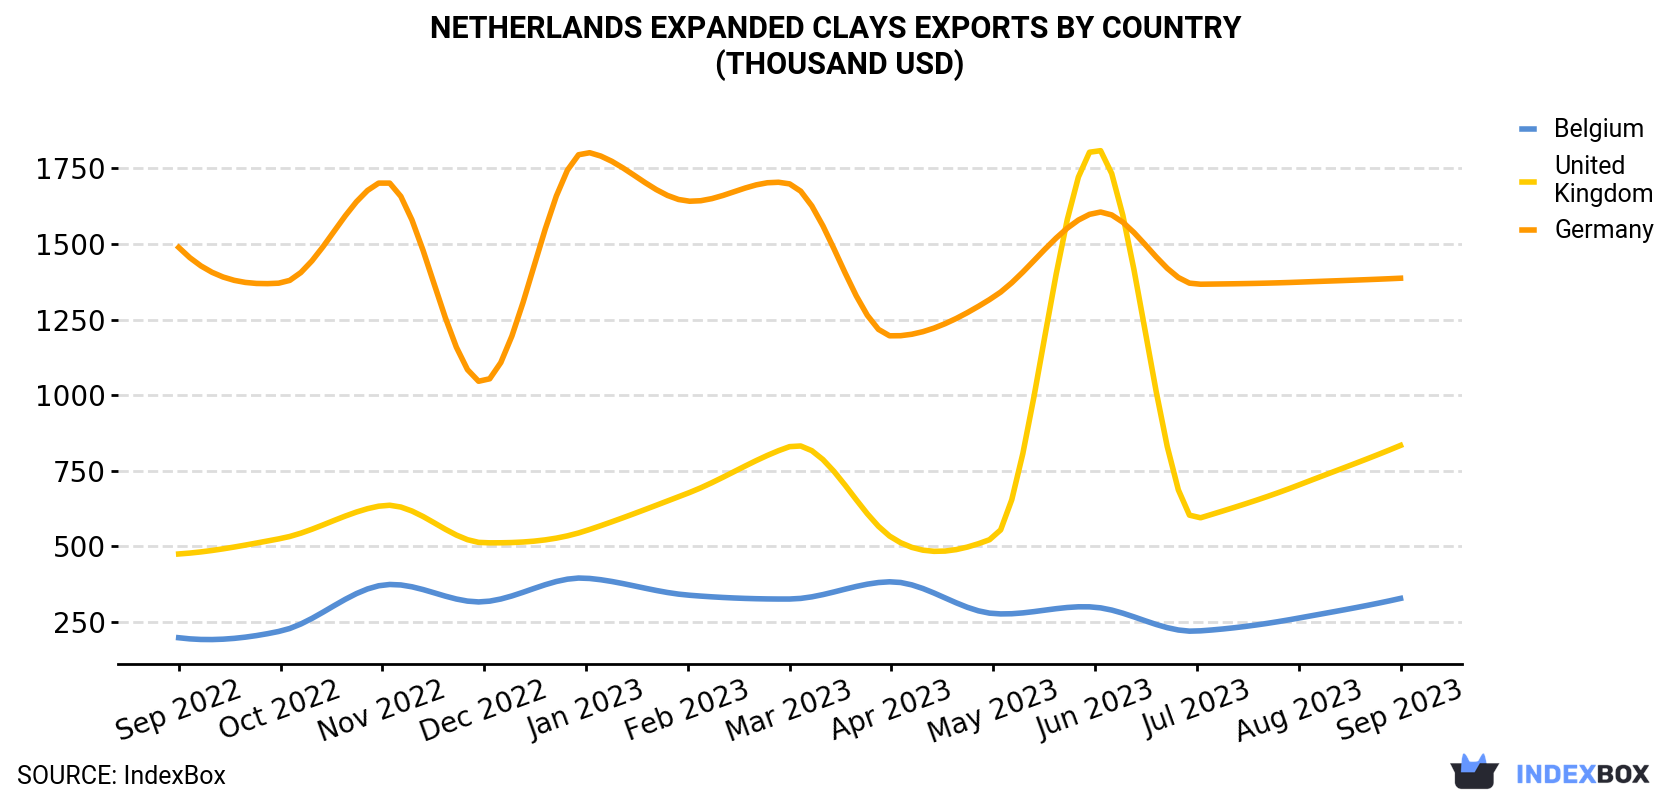 Netherlands Expanded Clays Exports By Country (Thousand USD)